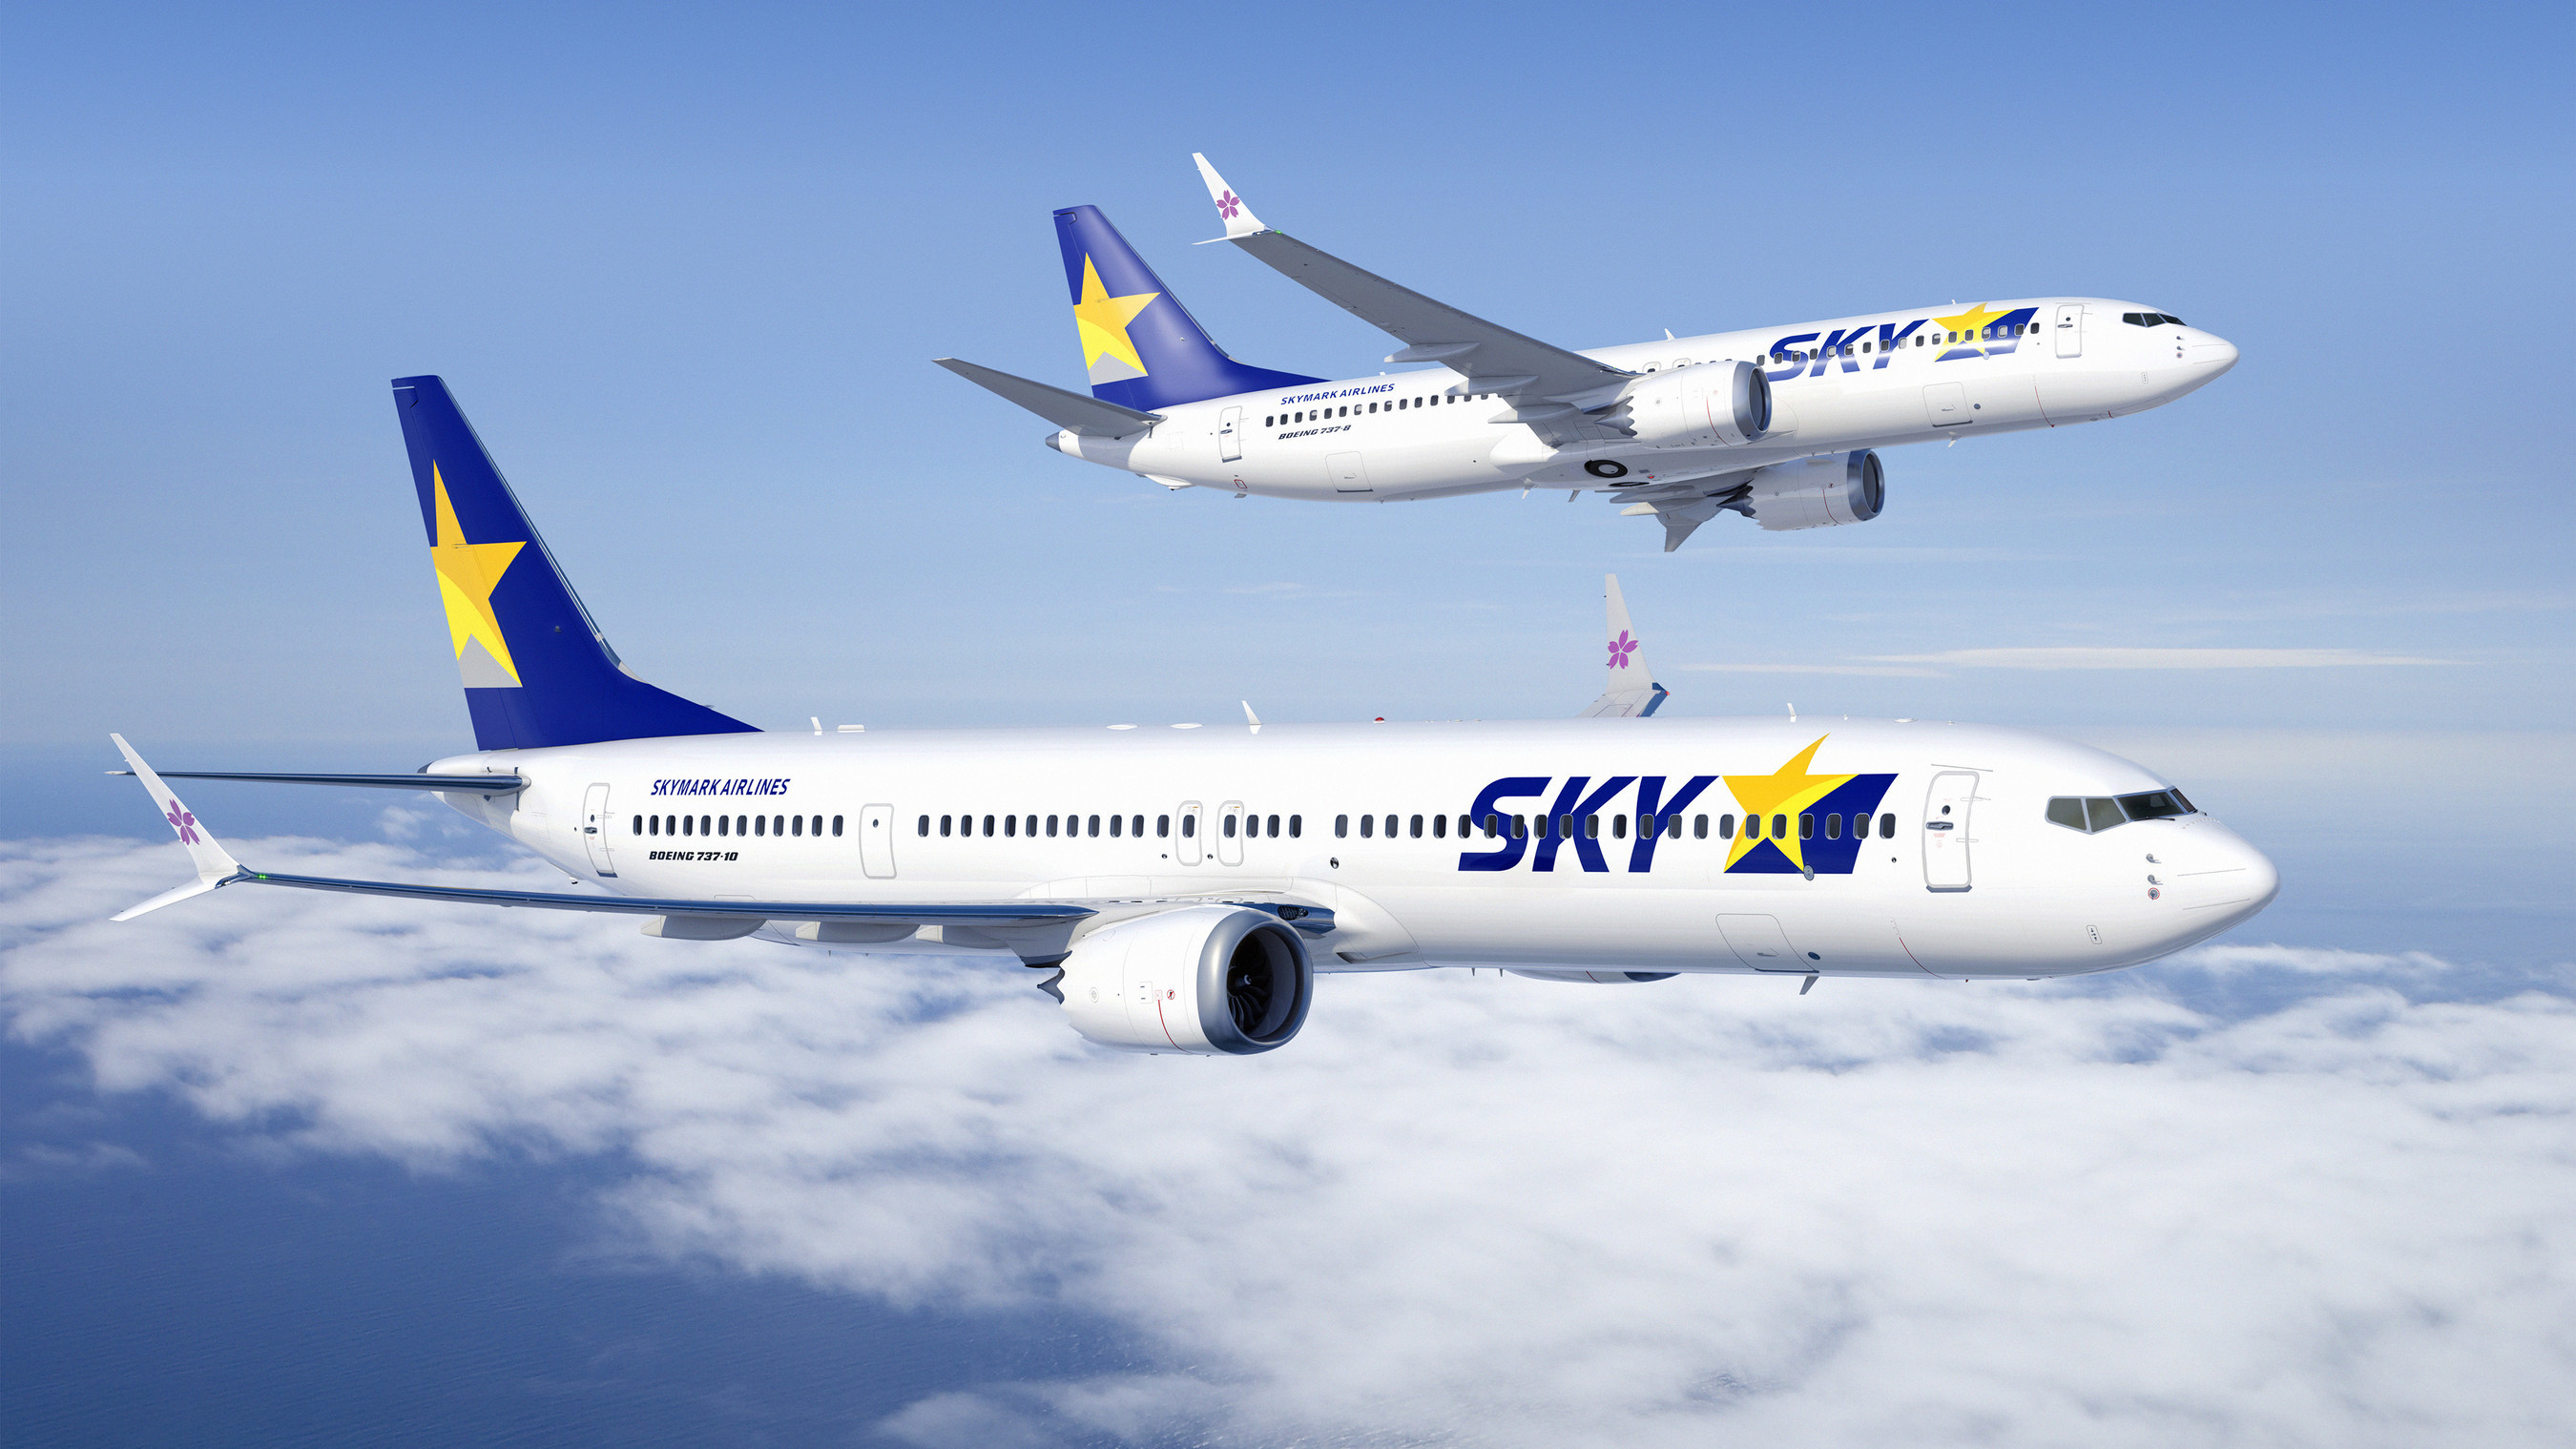 Skymark Airlines plans to buy up to 12 Boeing 737 MAX aircraft